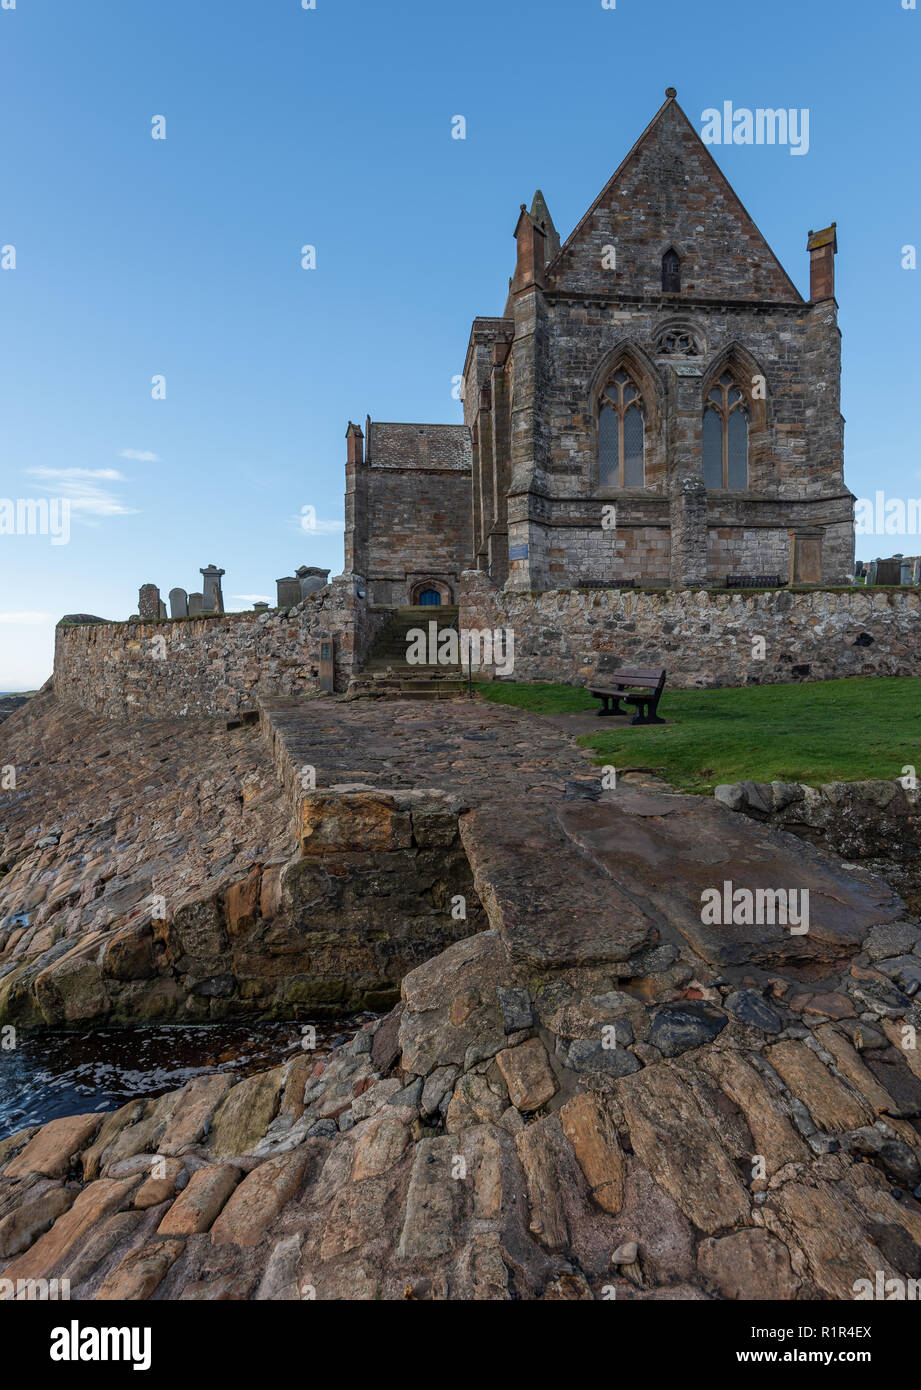 St Monans Church dates from medieval times and is situated in an isolated position on the very edge of the North Sea in the East Neuk of Fife, Scotlan Stock Photo